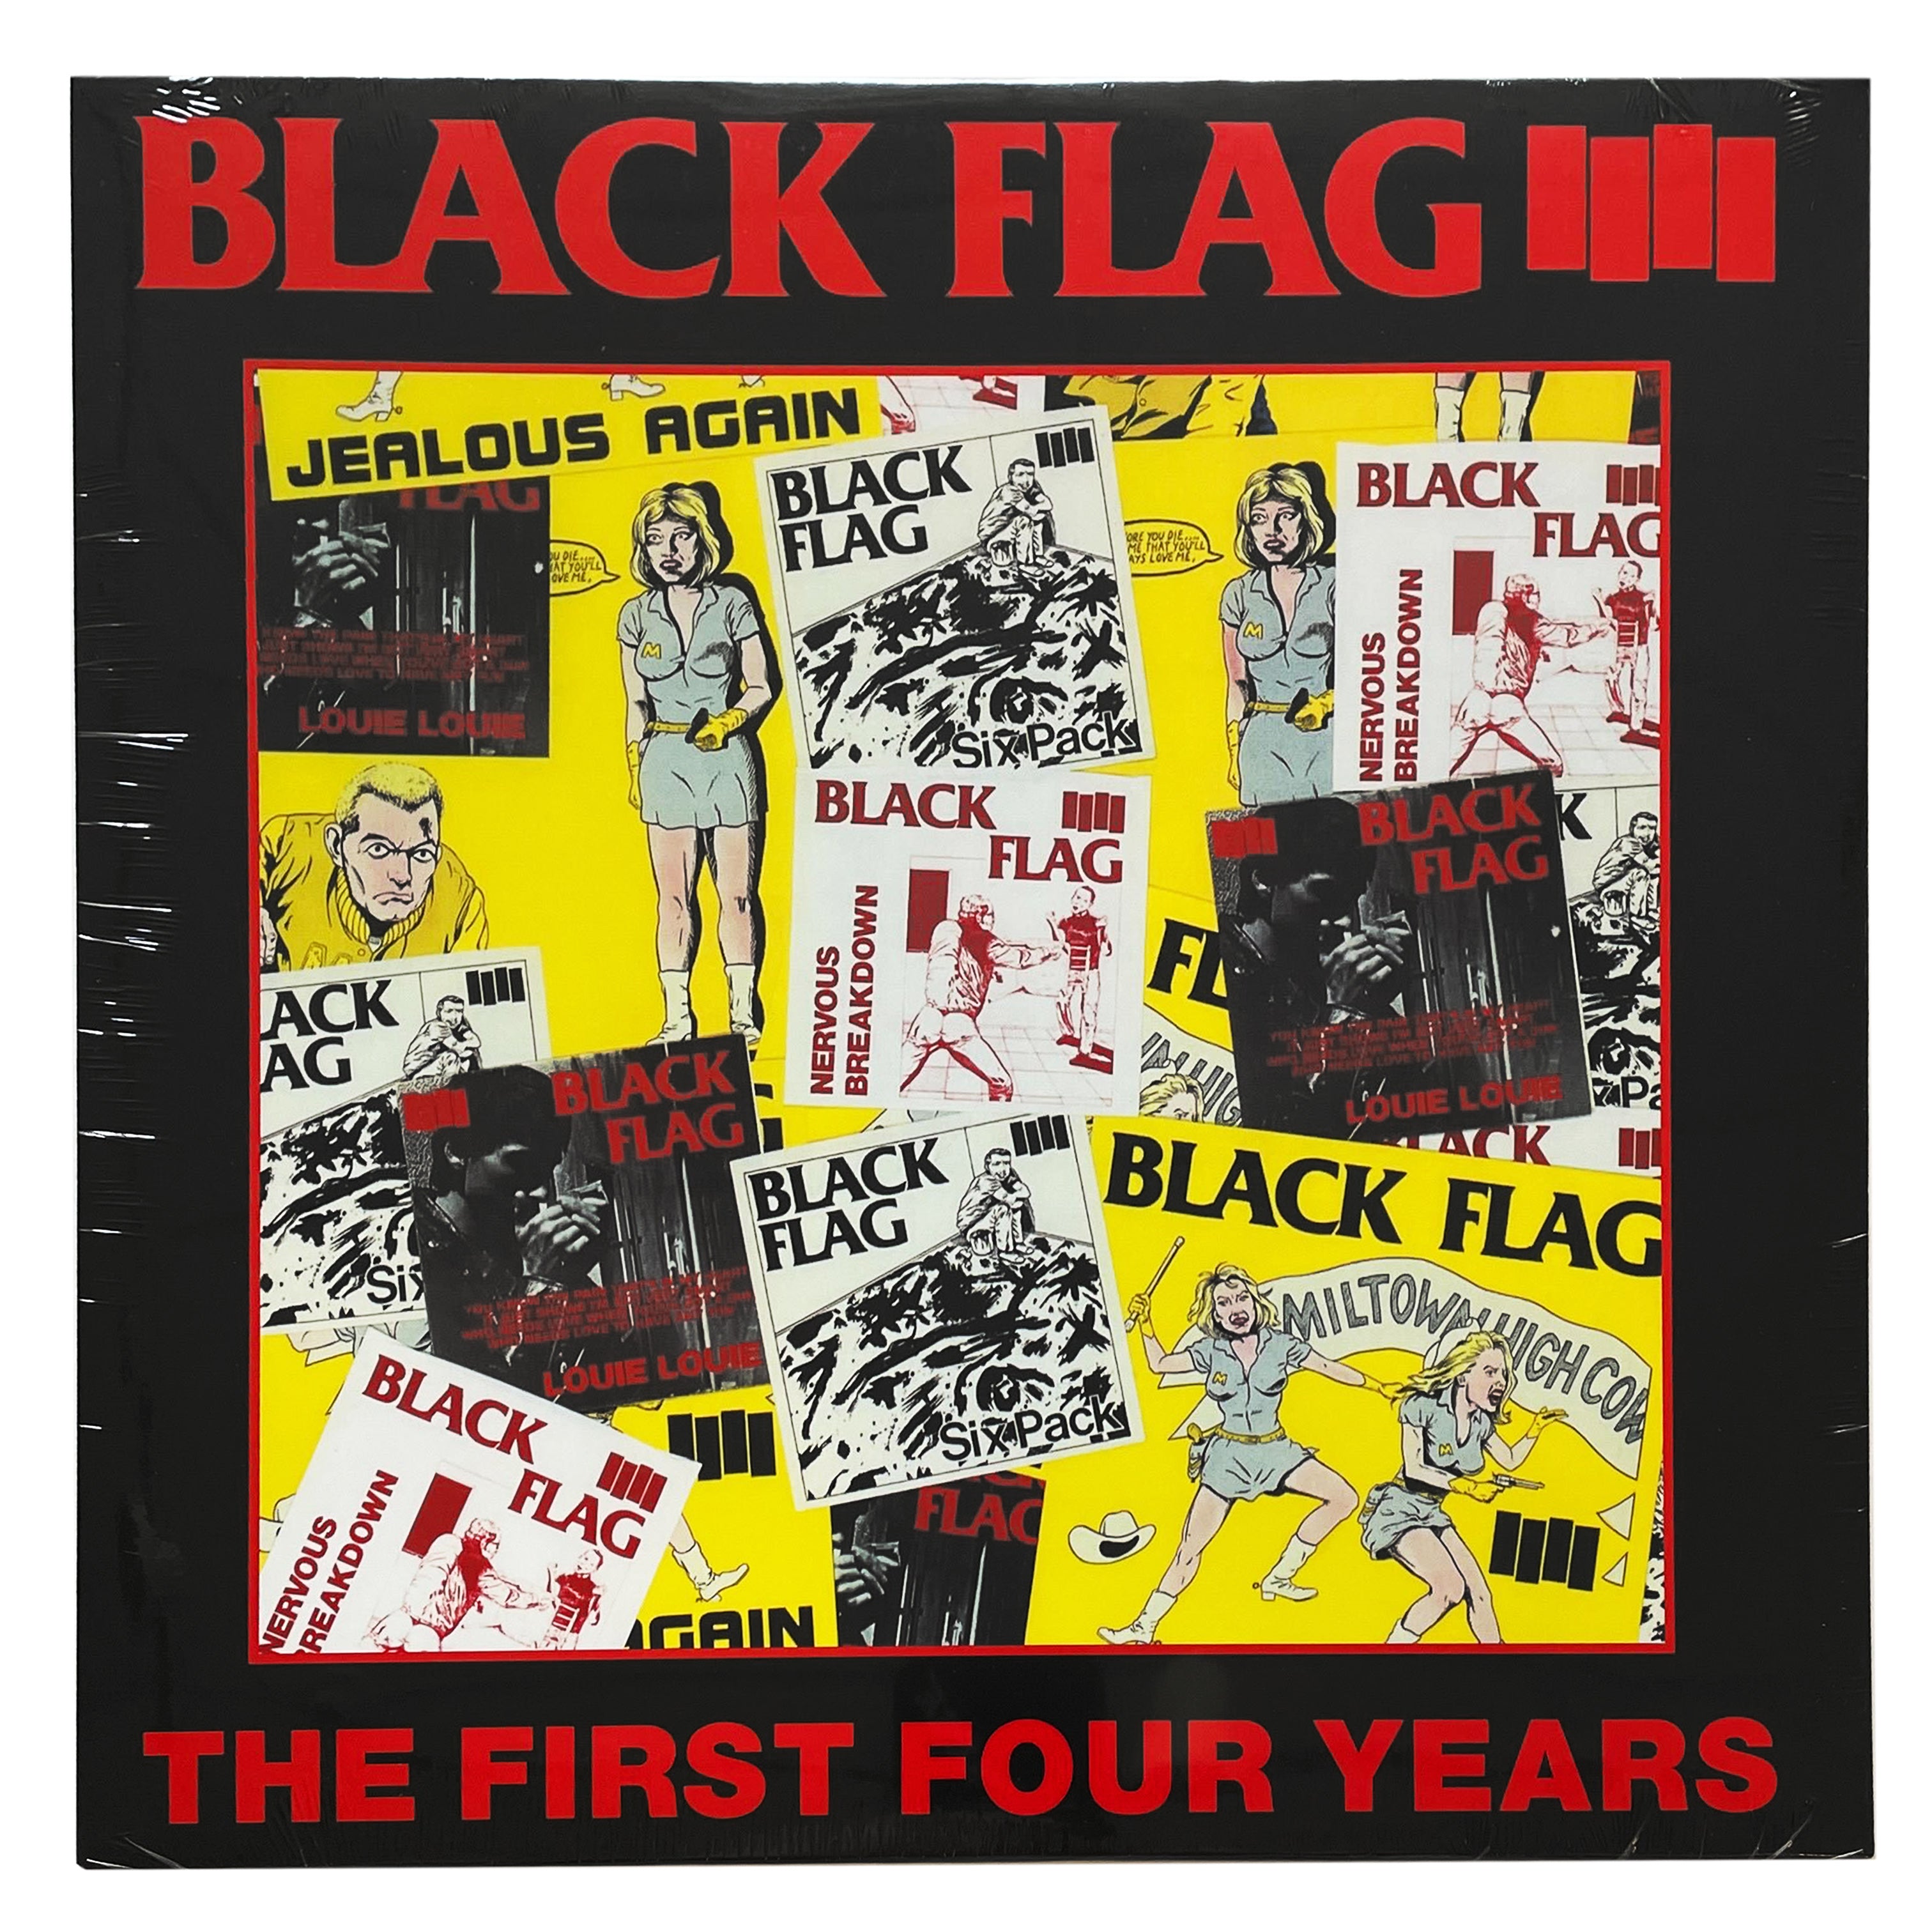 Black Flag Albums: songs, discography, biography, and listening guide -  Rate Your Music